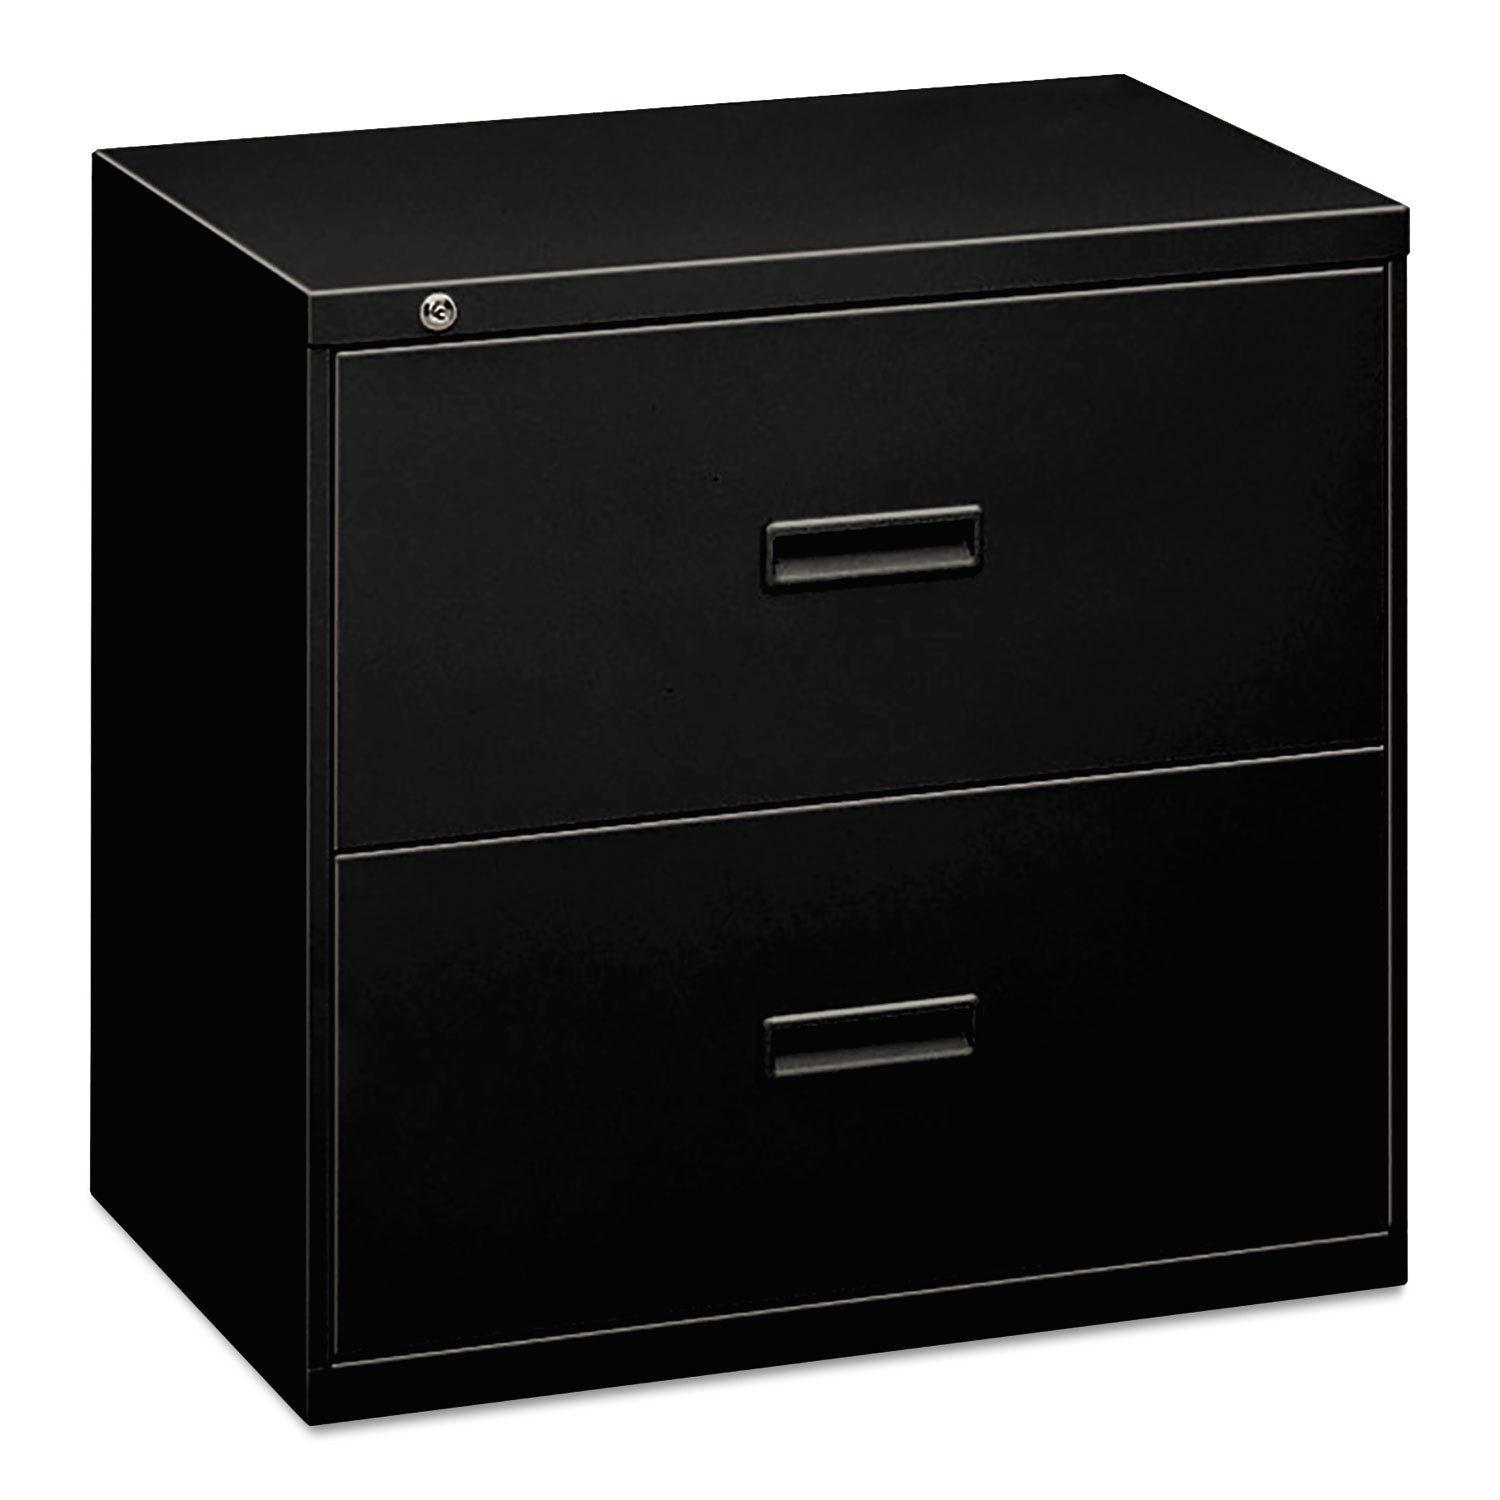 400 Series Lateral File, 2 Legal/Letter-Size File Drawers, Black, 36" x 18" x 28 - 